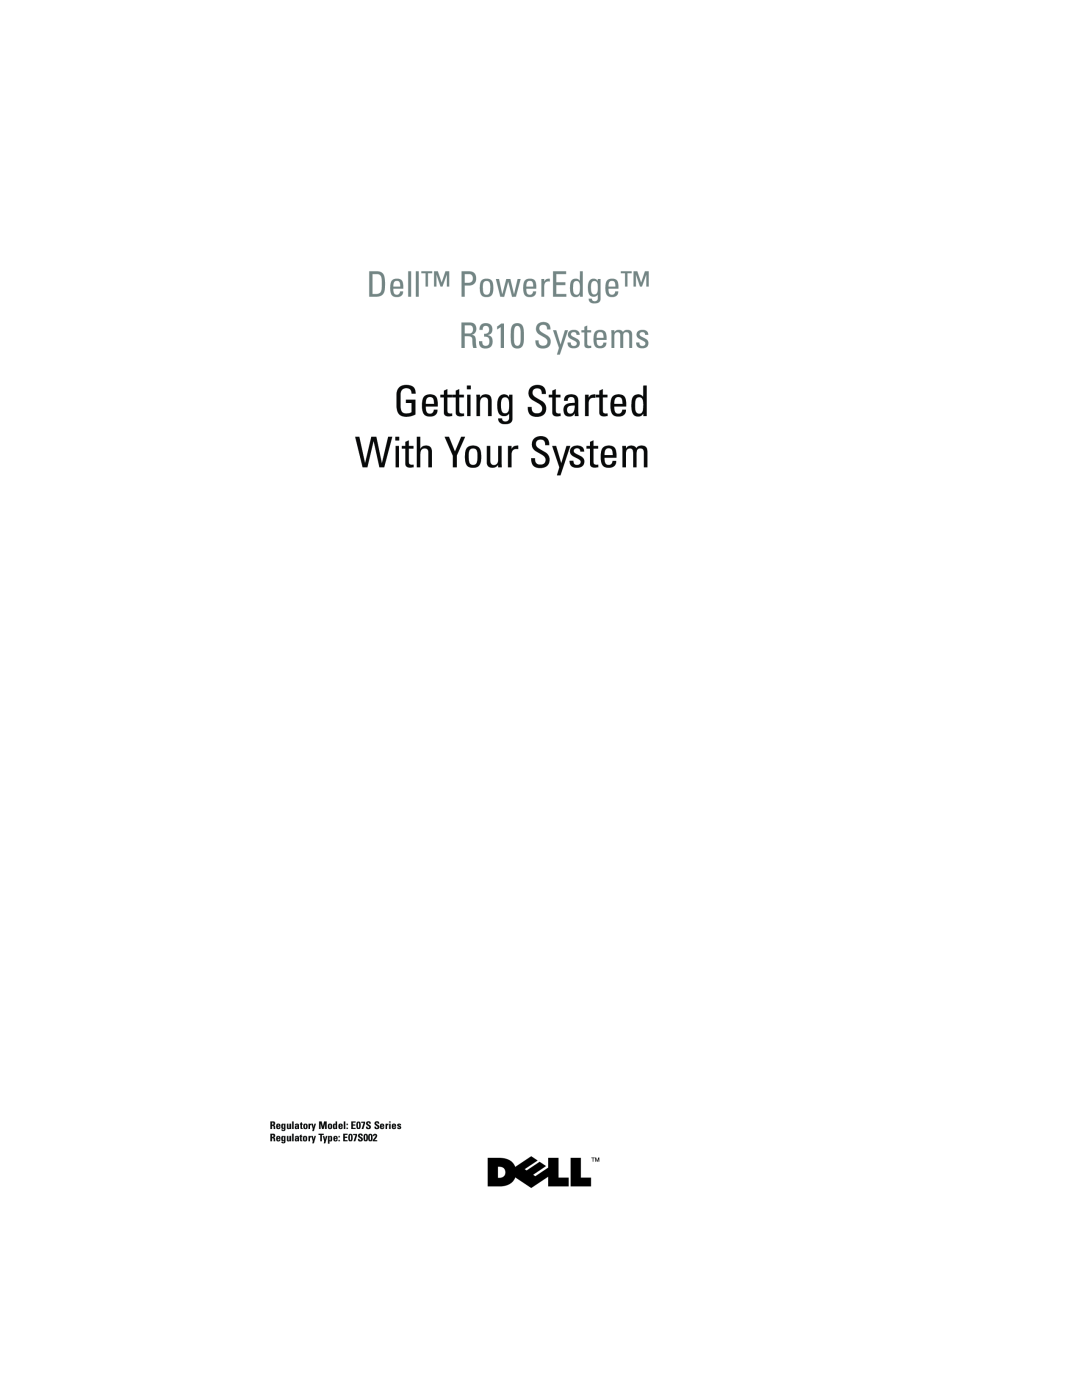 Dell manual Getting Started With Your System, Dell PowerEdge R310 Systems 